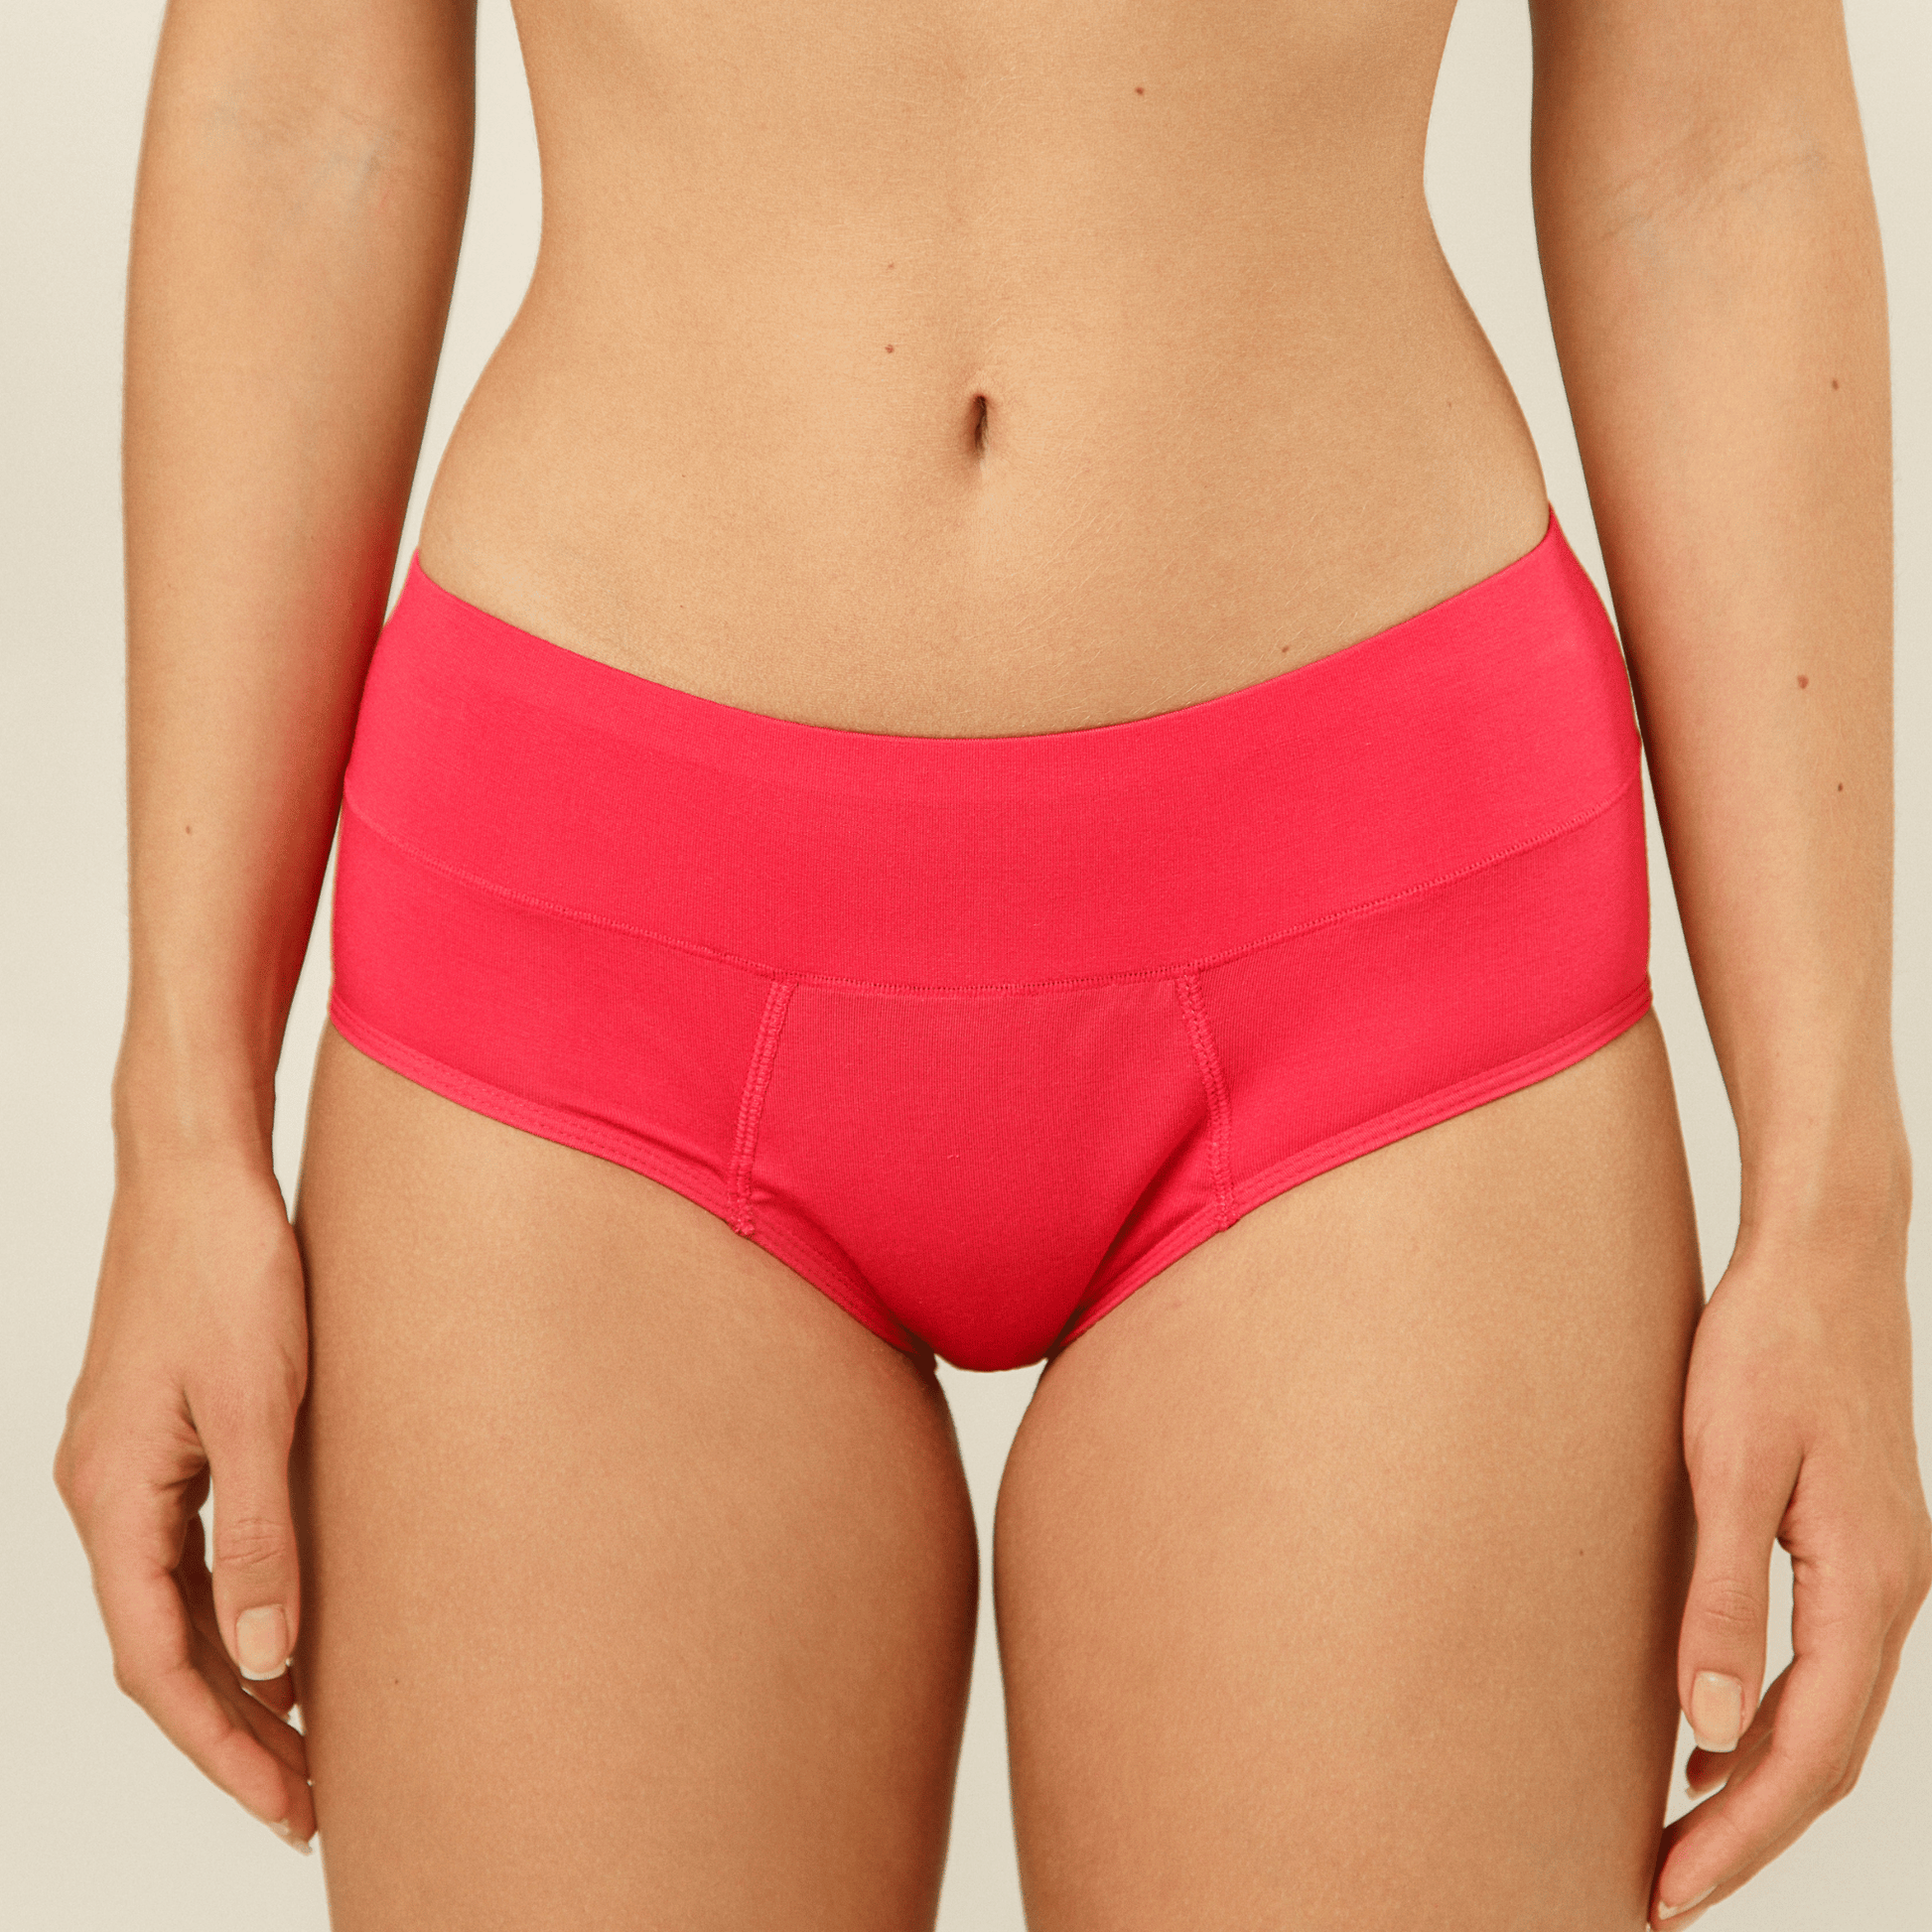  BLEDD Leakproof Underwear,Leakproof High Waisted For